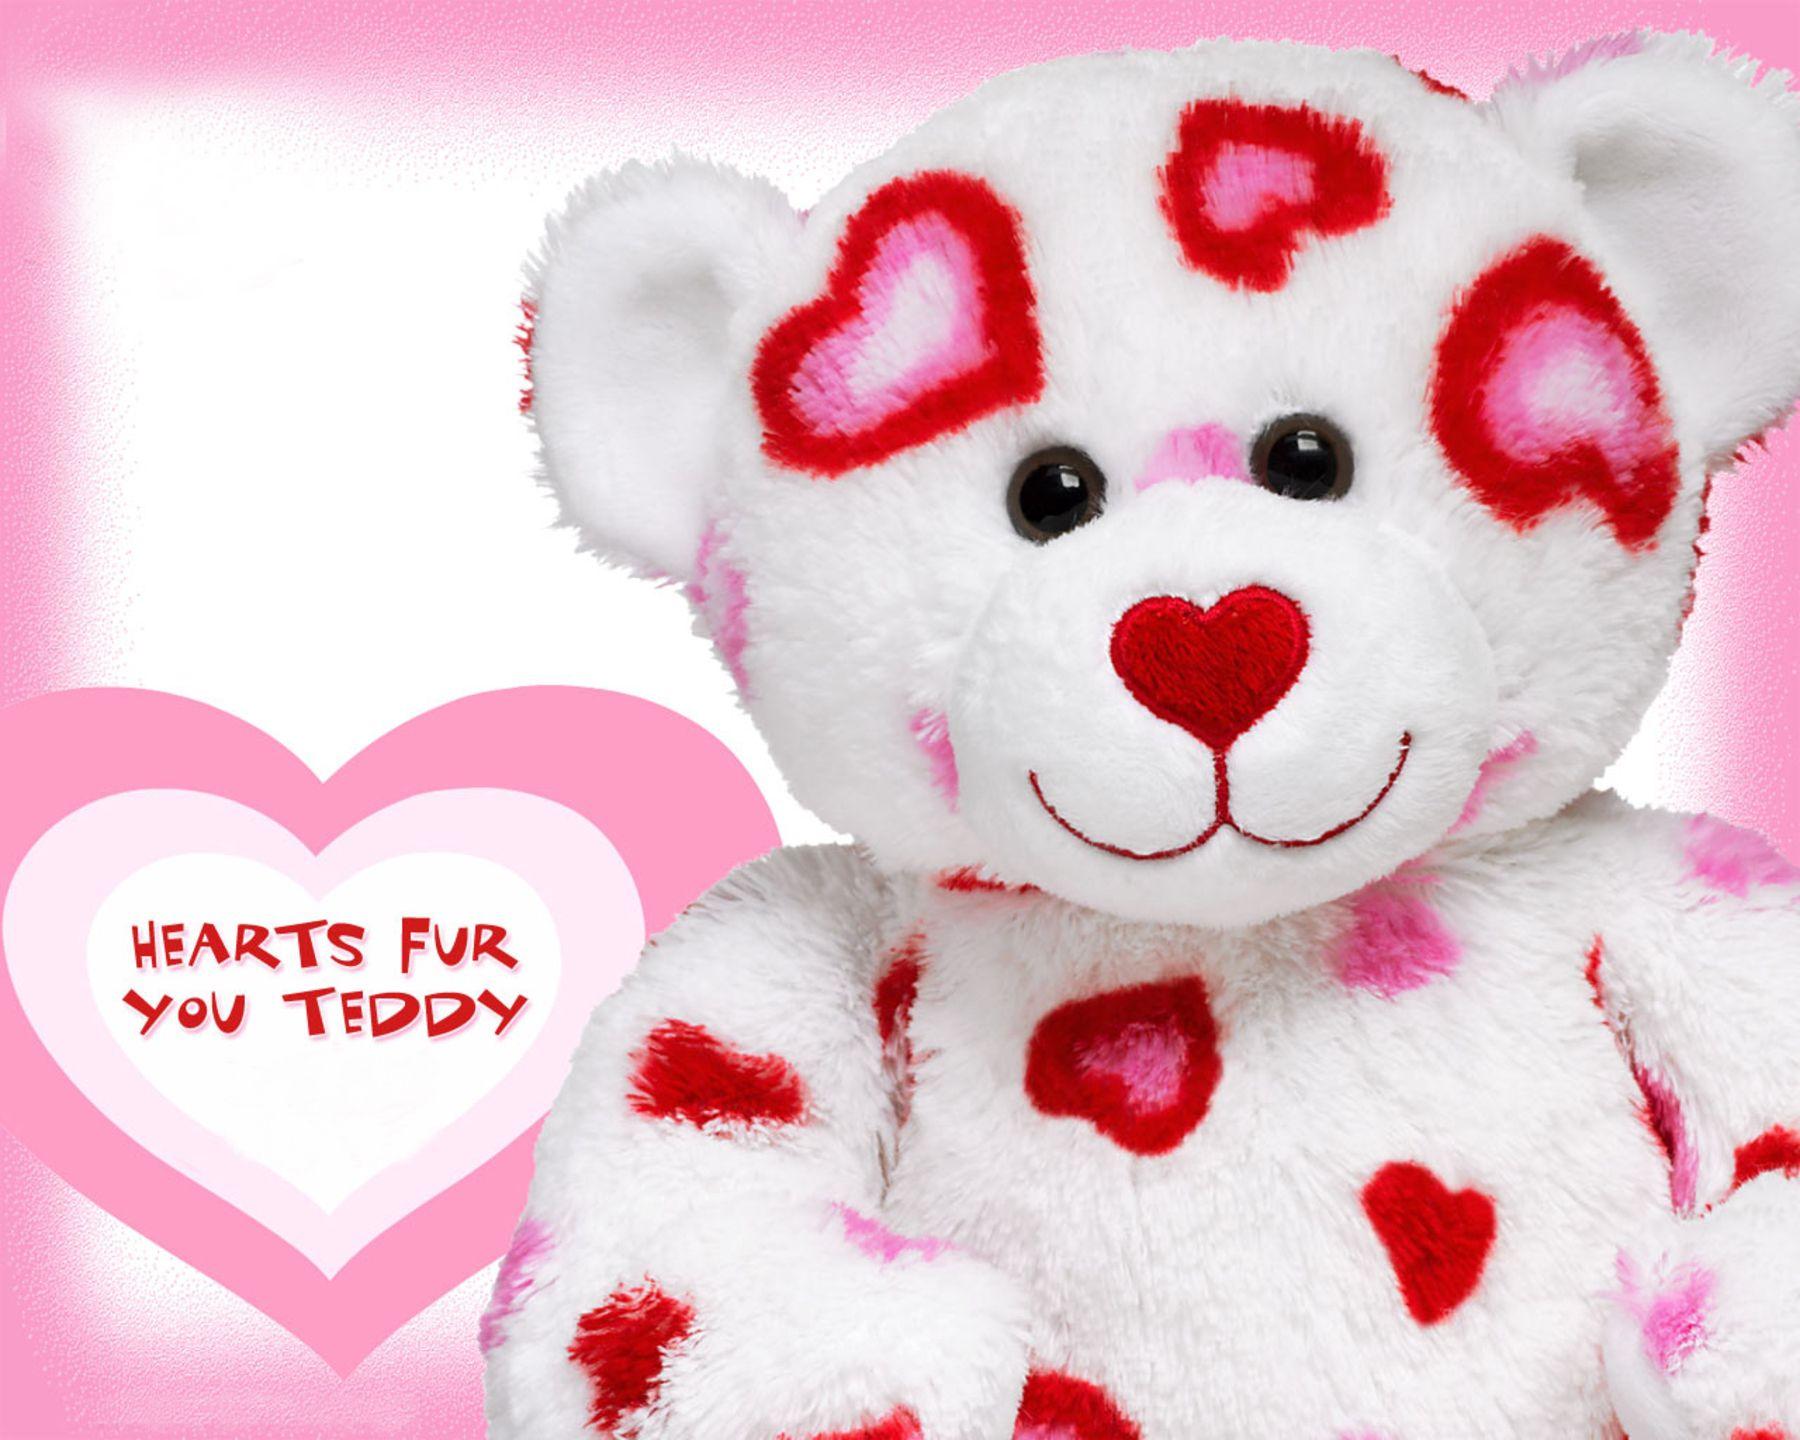 Teddy Day 2023 Images & HD Wallpapers for Free Download Online